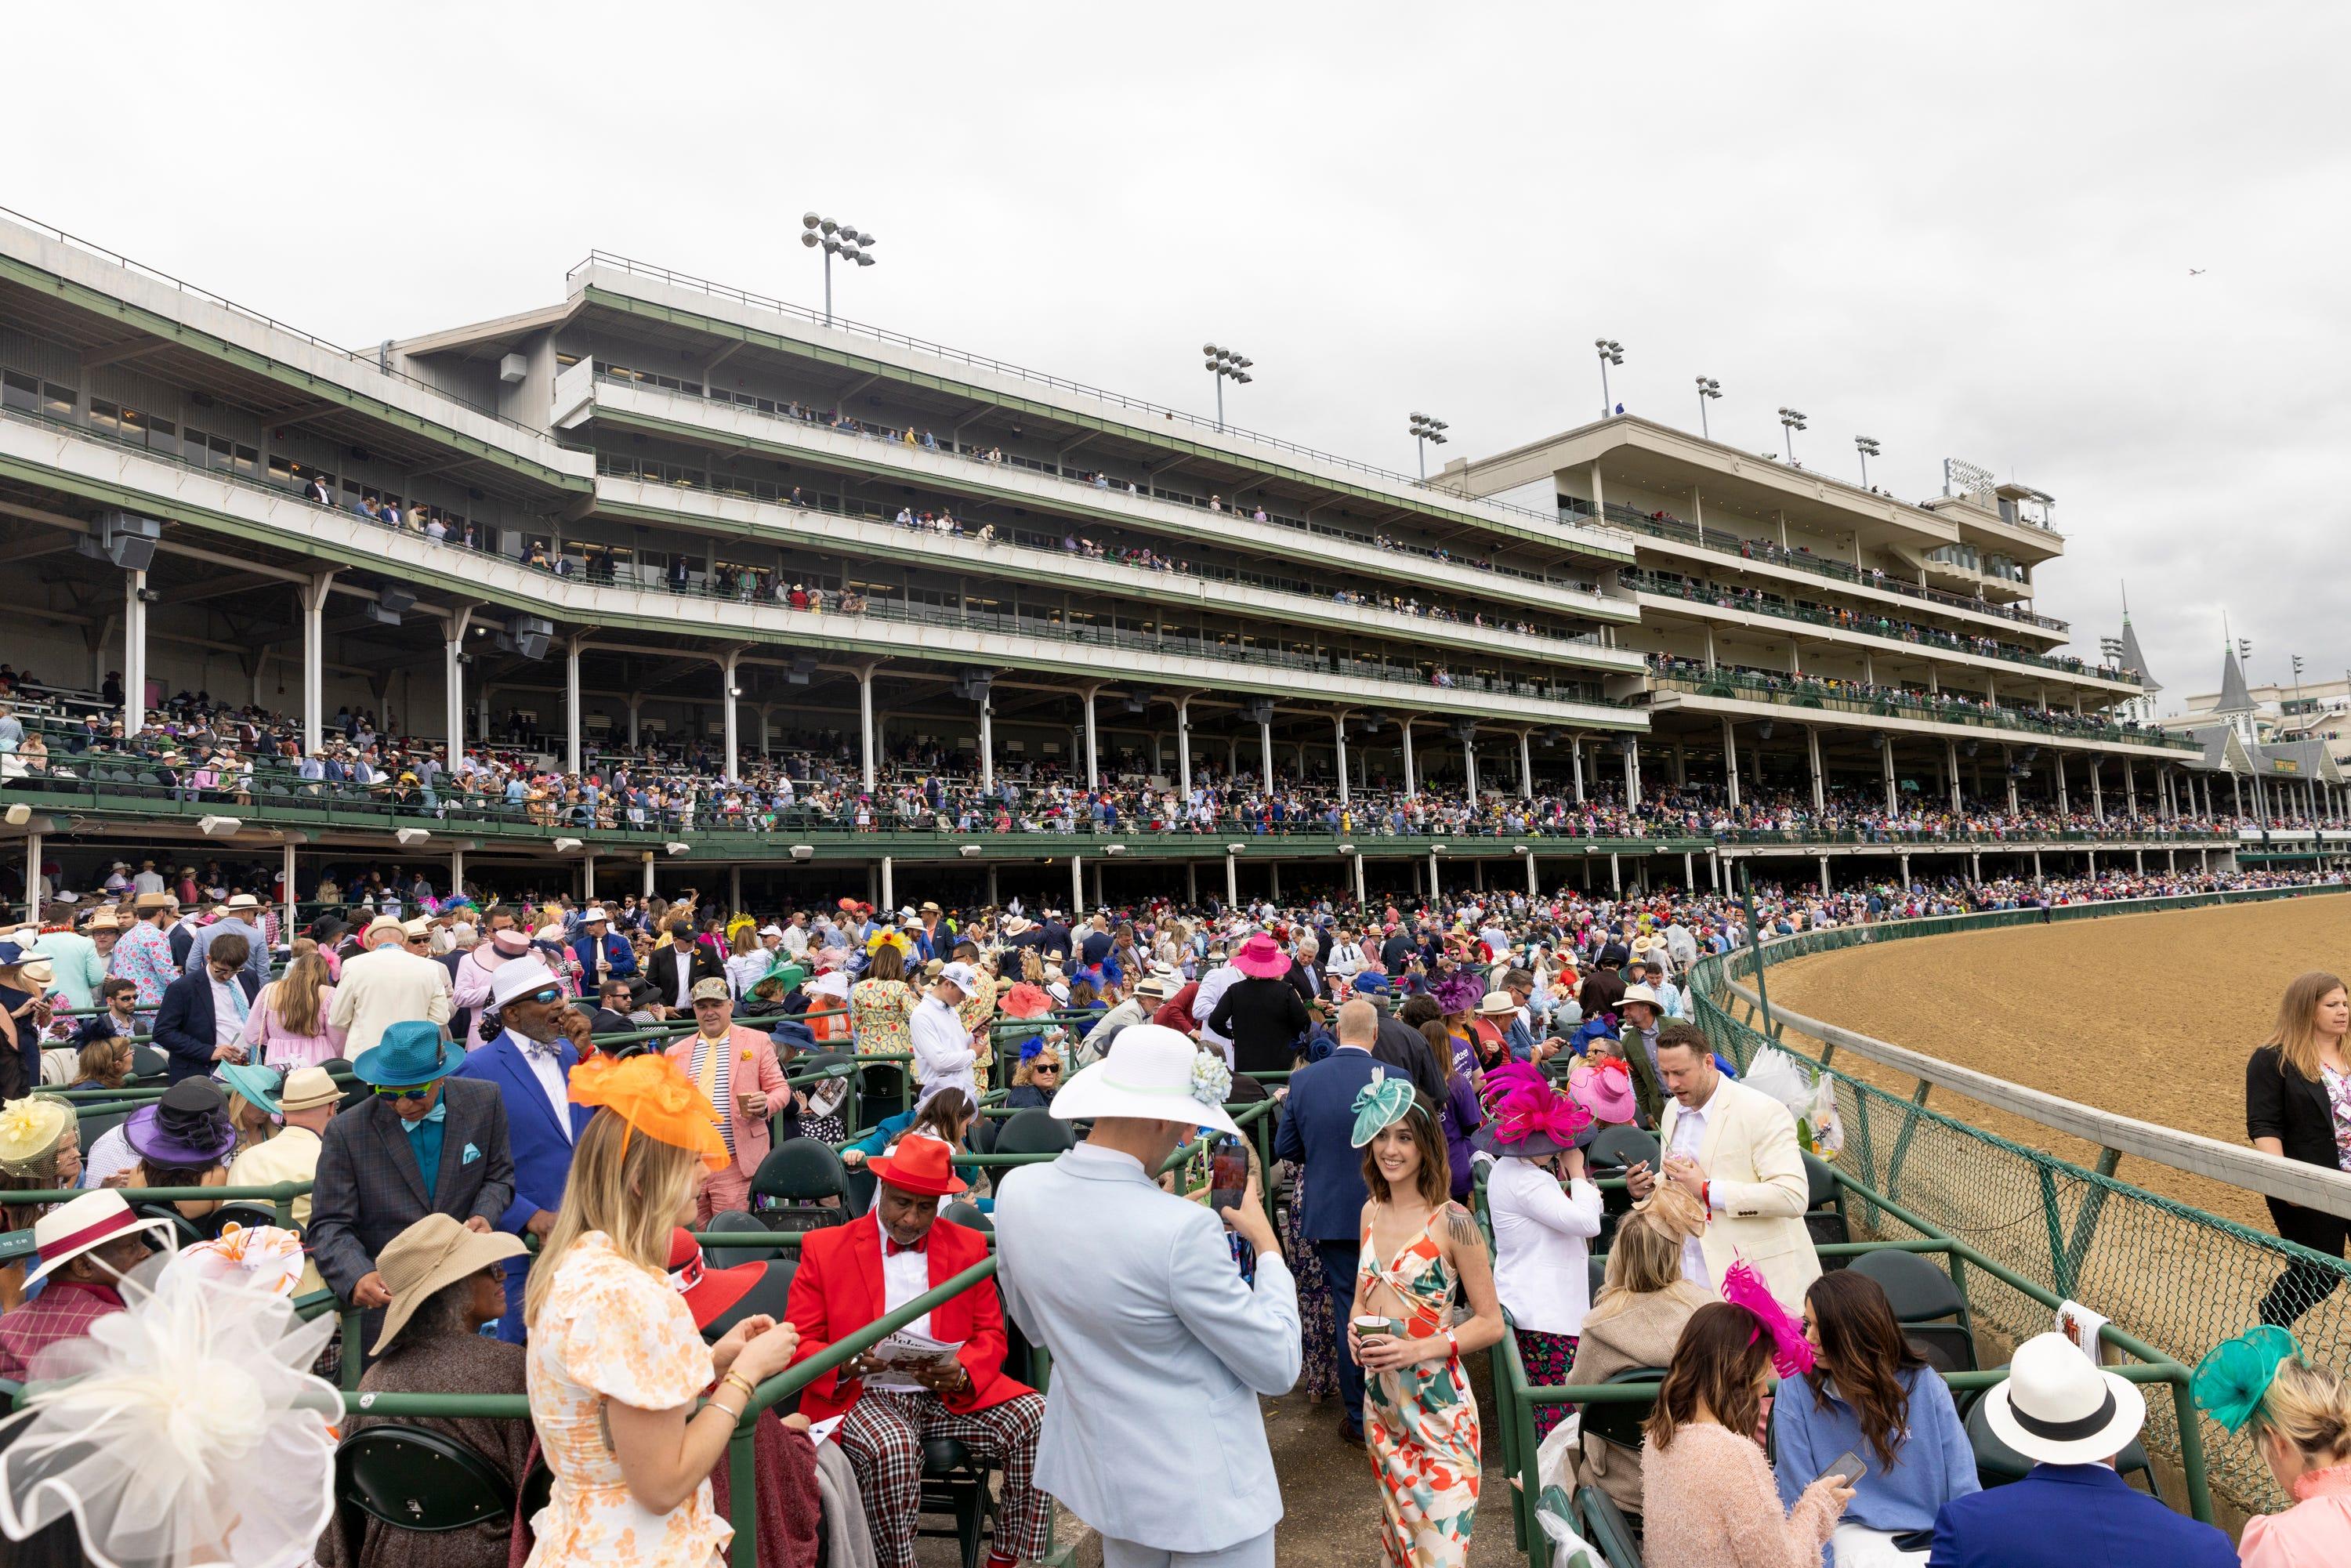 Crowds fill the Churchill Downs grandstands for Derby Day.